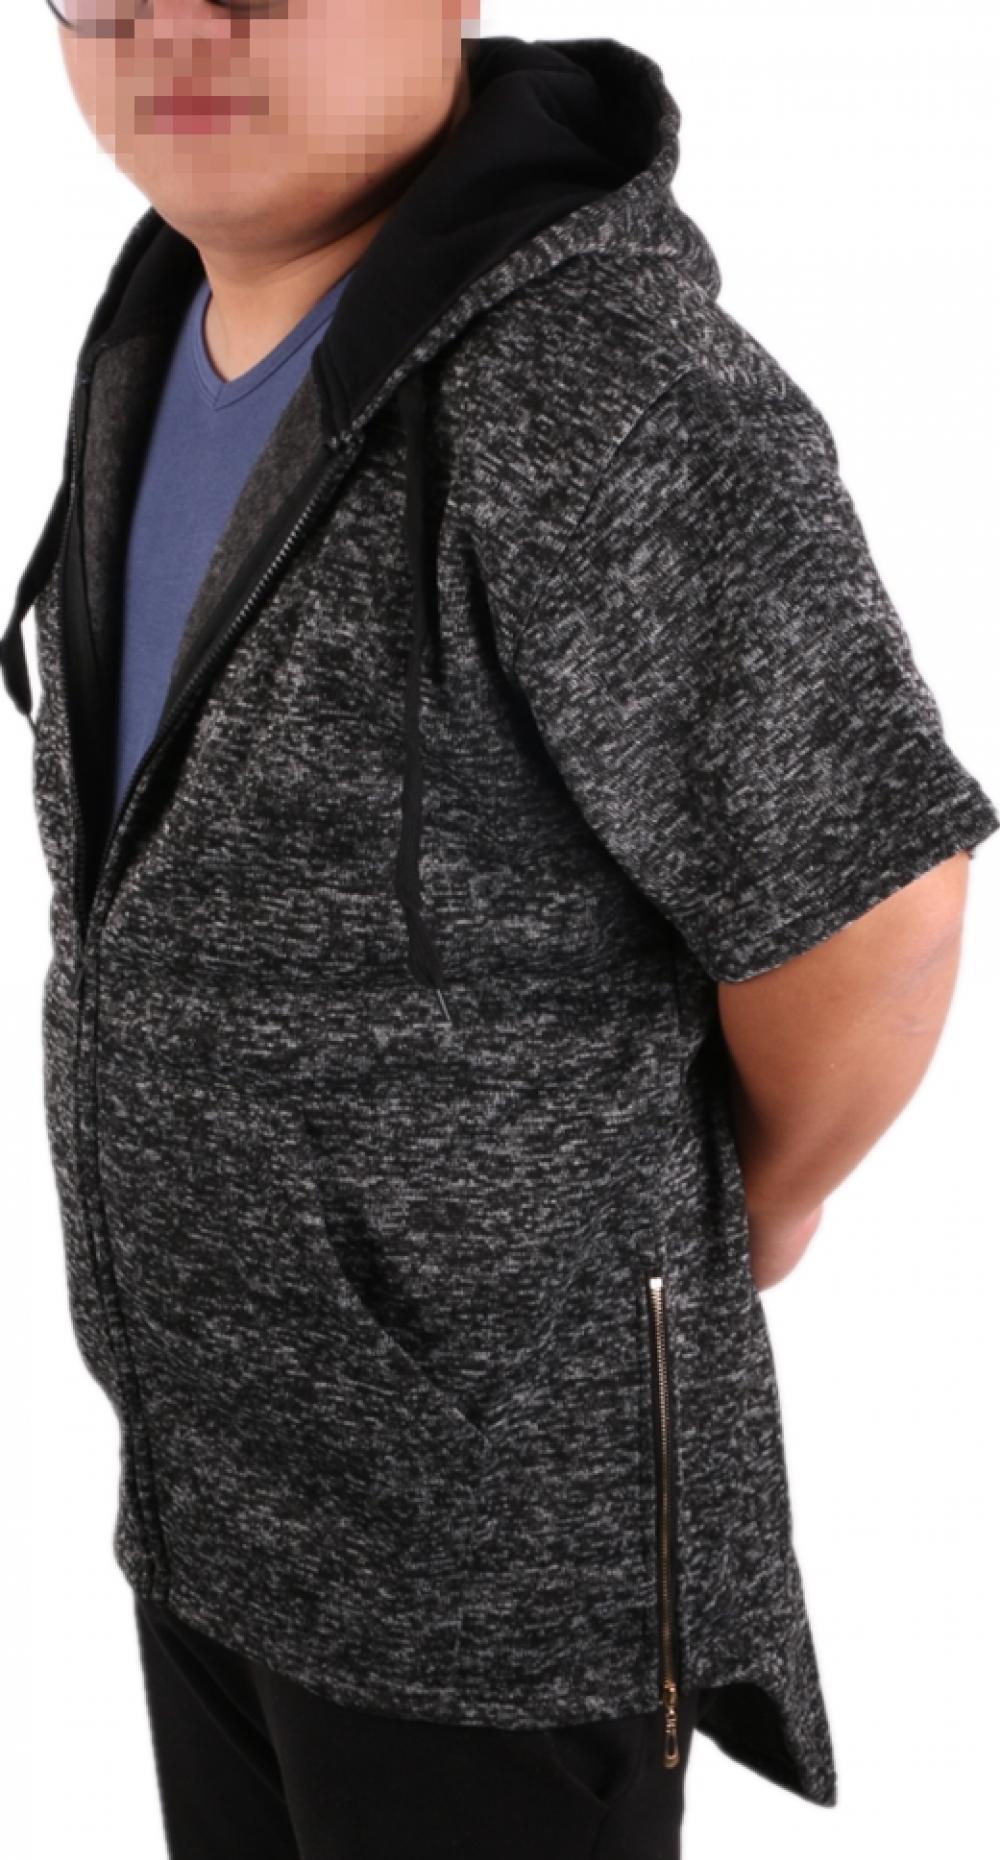 Knitted Short Sleeve Drop Tail Zip Up Hoody